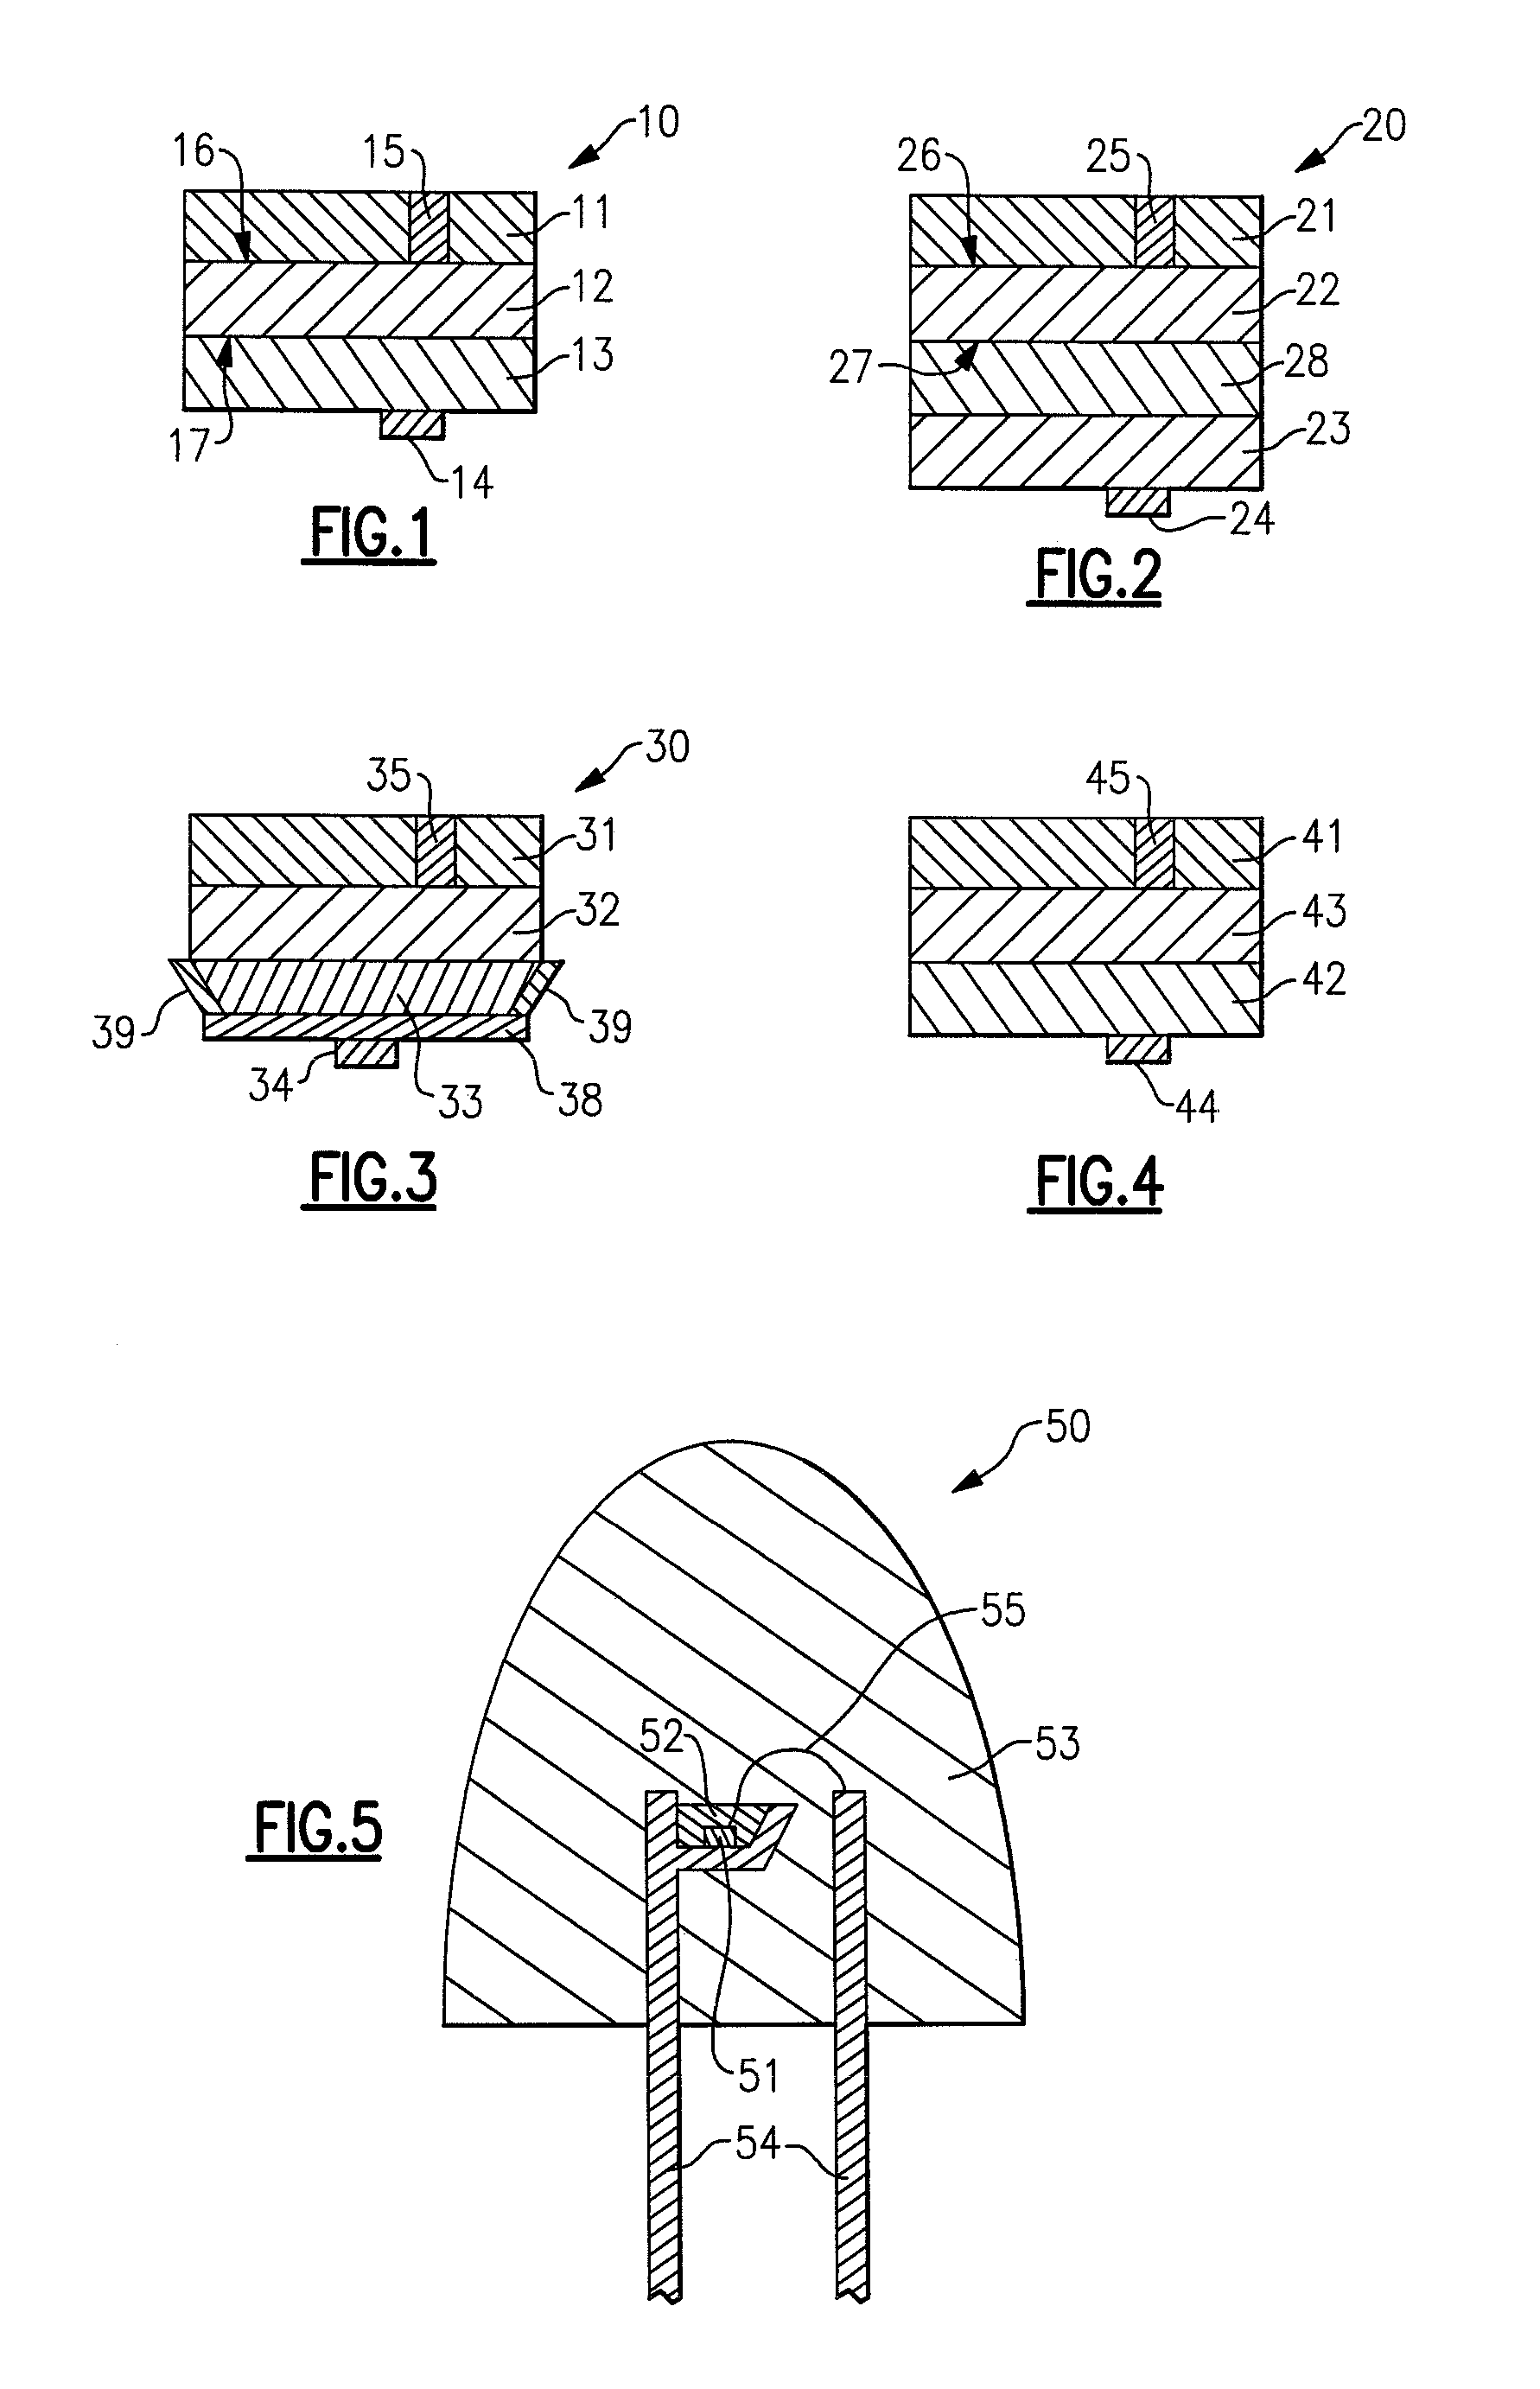 Solid state light emitting device and method of making same